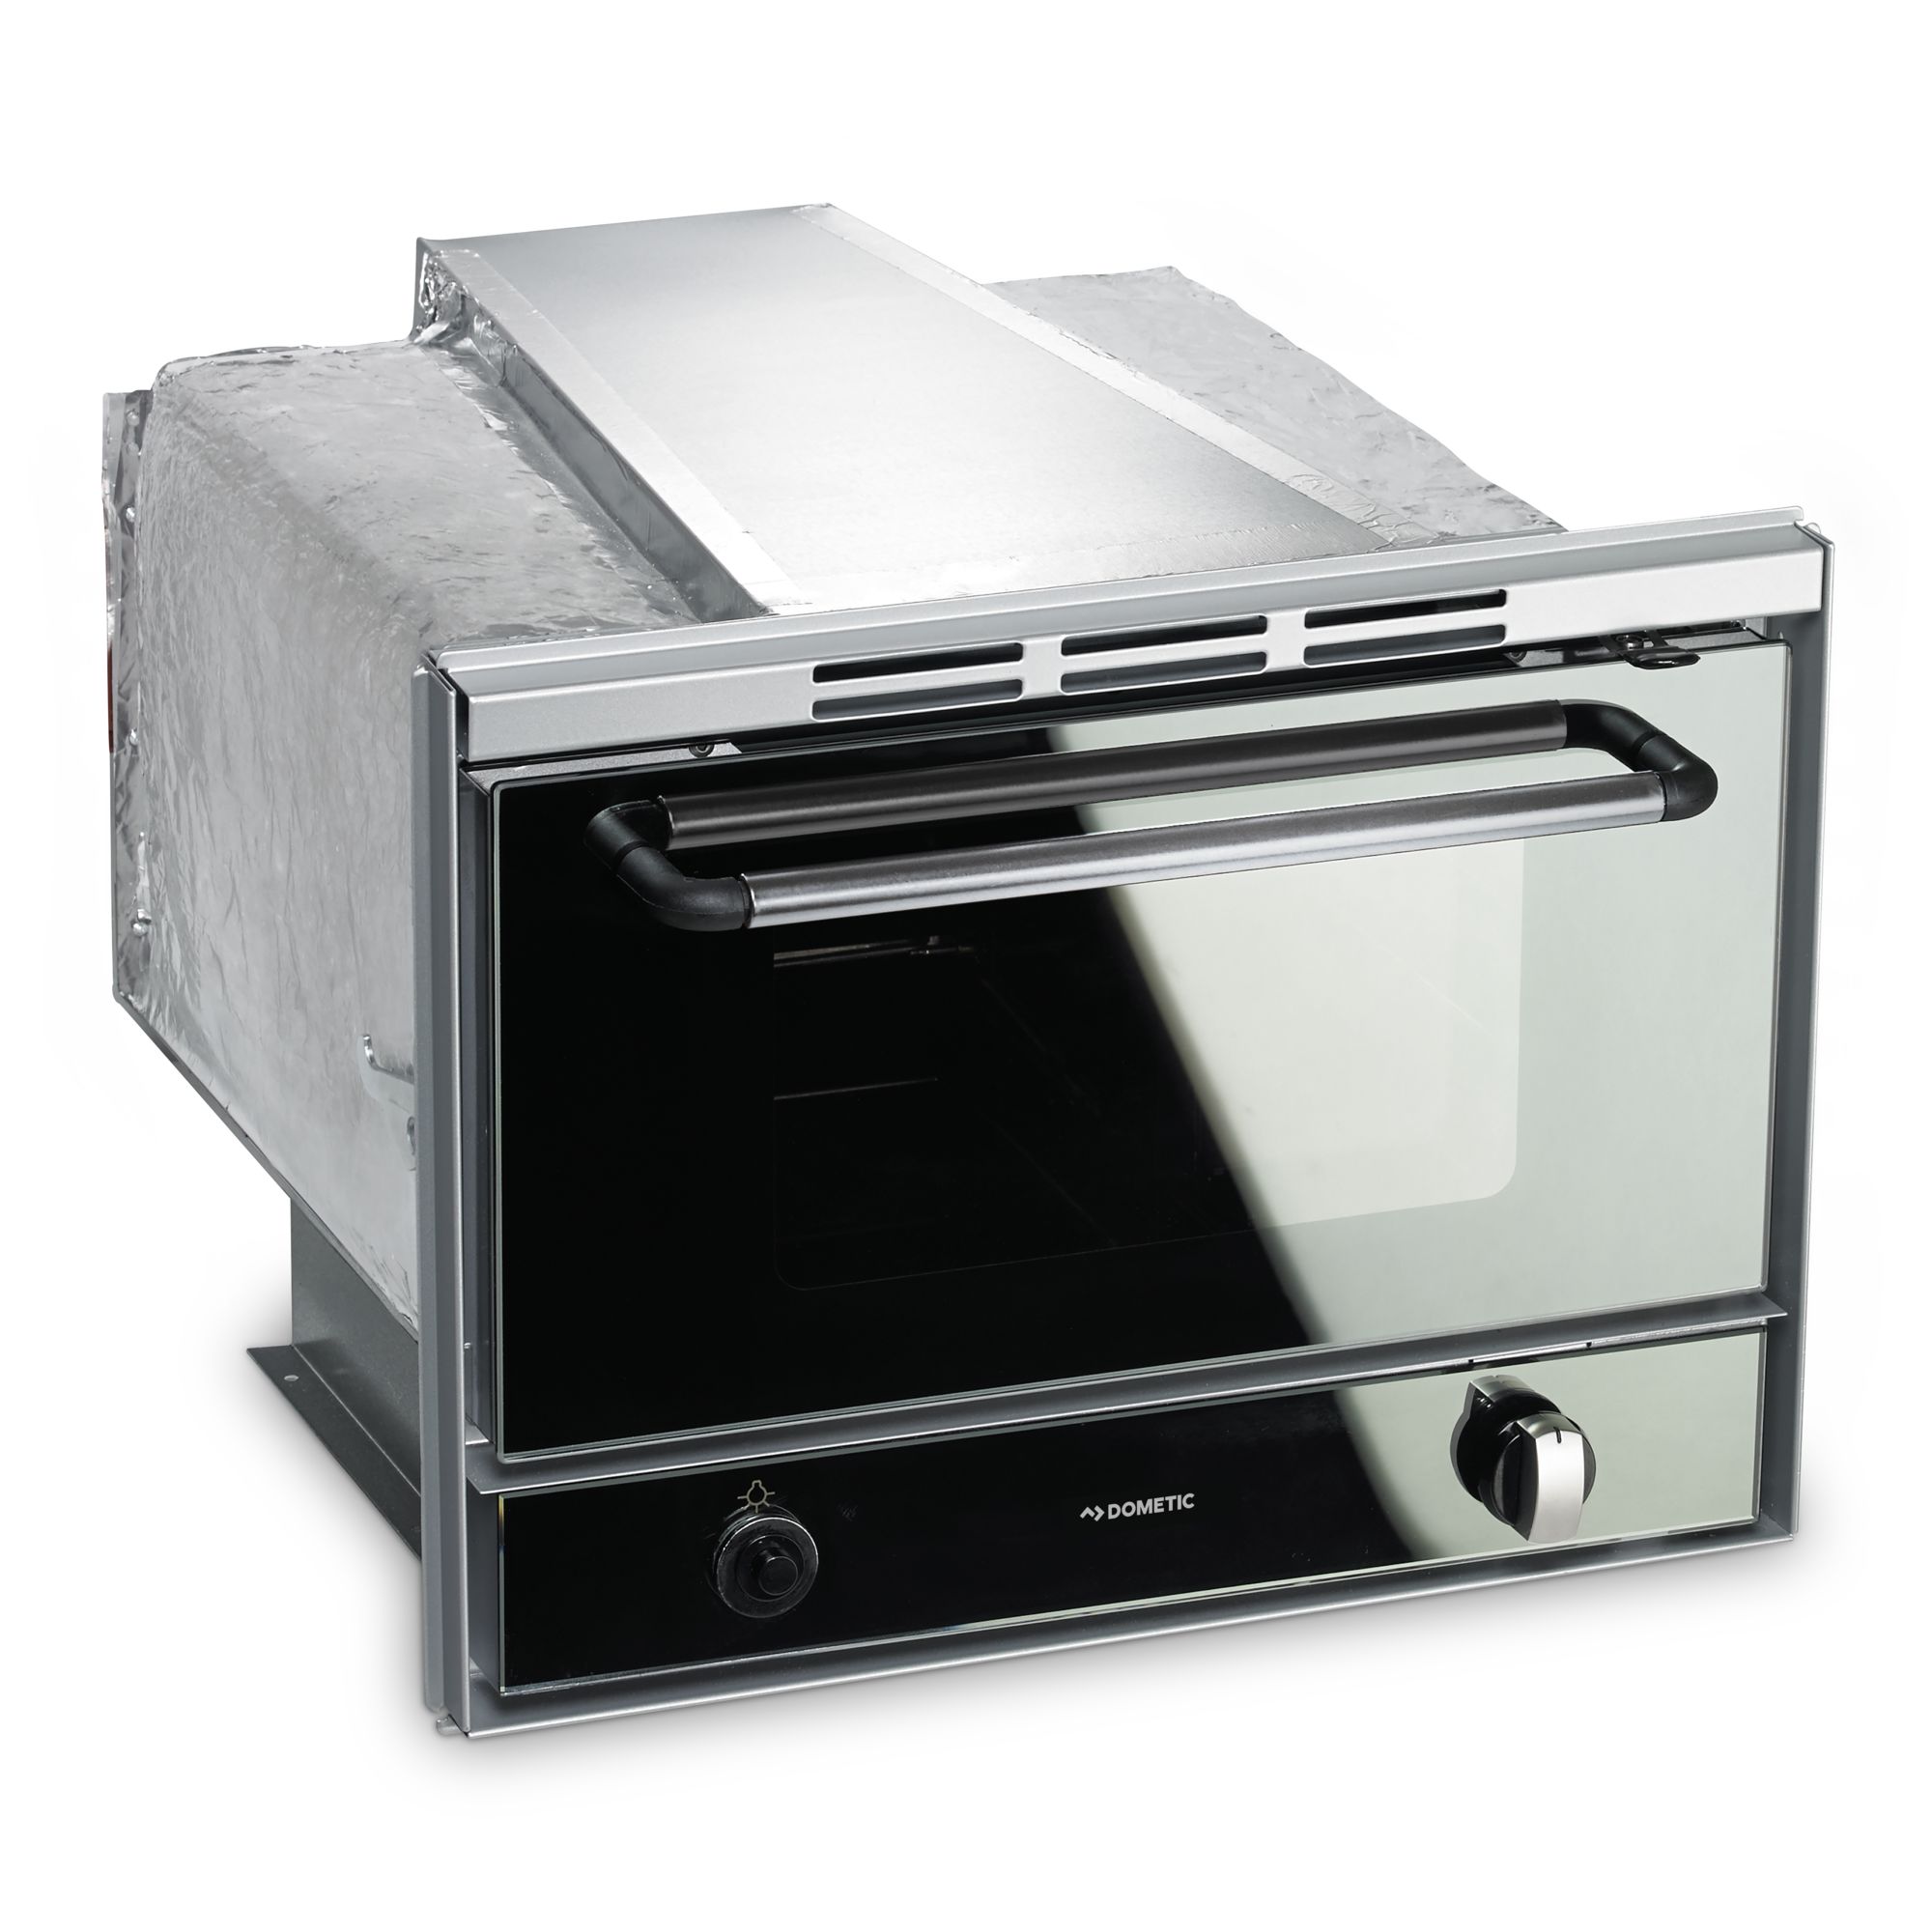 Dometic OV 1800 built-in gas baking oven with 18 liter capacity